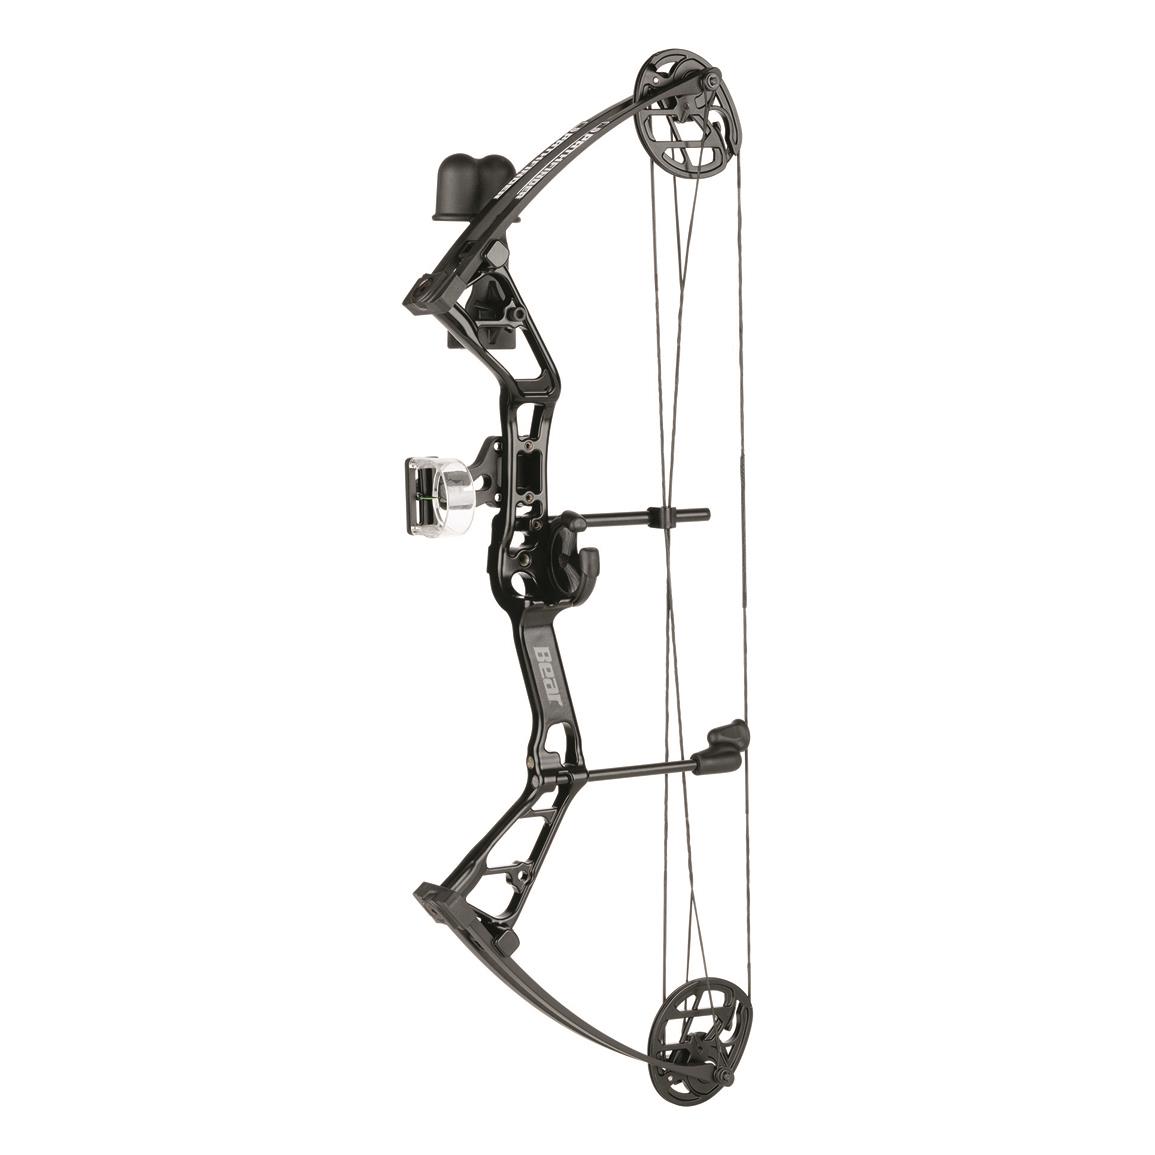 Bear Archery Pathfinder Youth Ready-to-Hunt Compound Bow Package, Right Hand, 15-29 lbs., Black